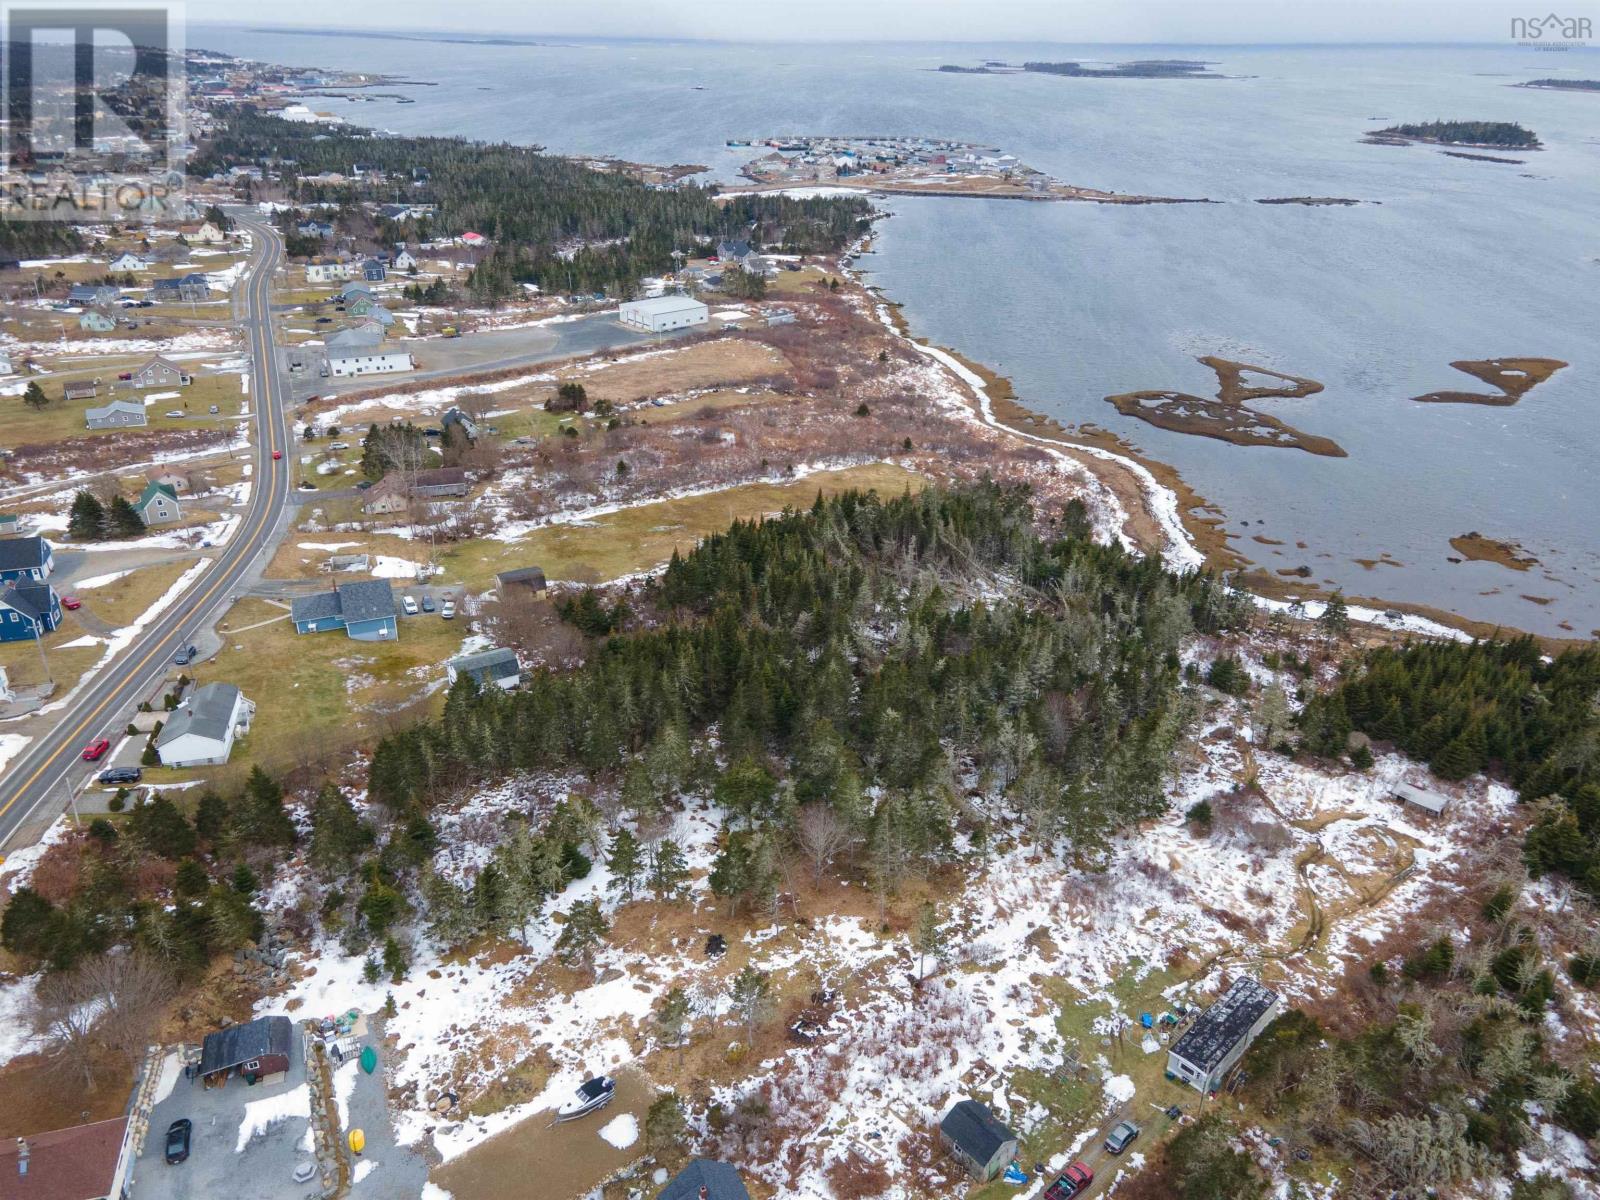 Lot 3 Highway located in Central Woods Harbour, Nova Scotia